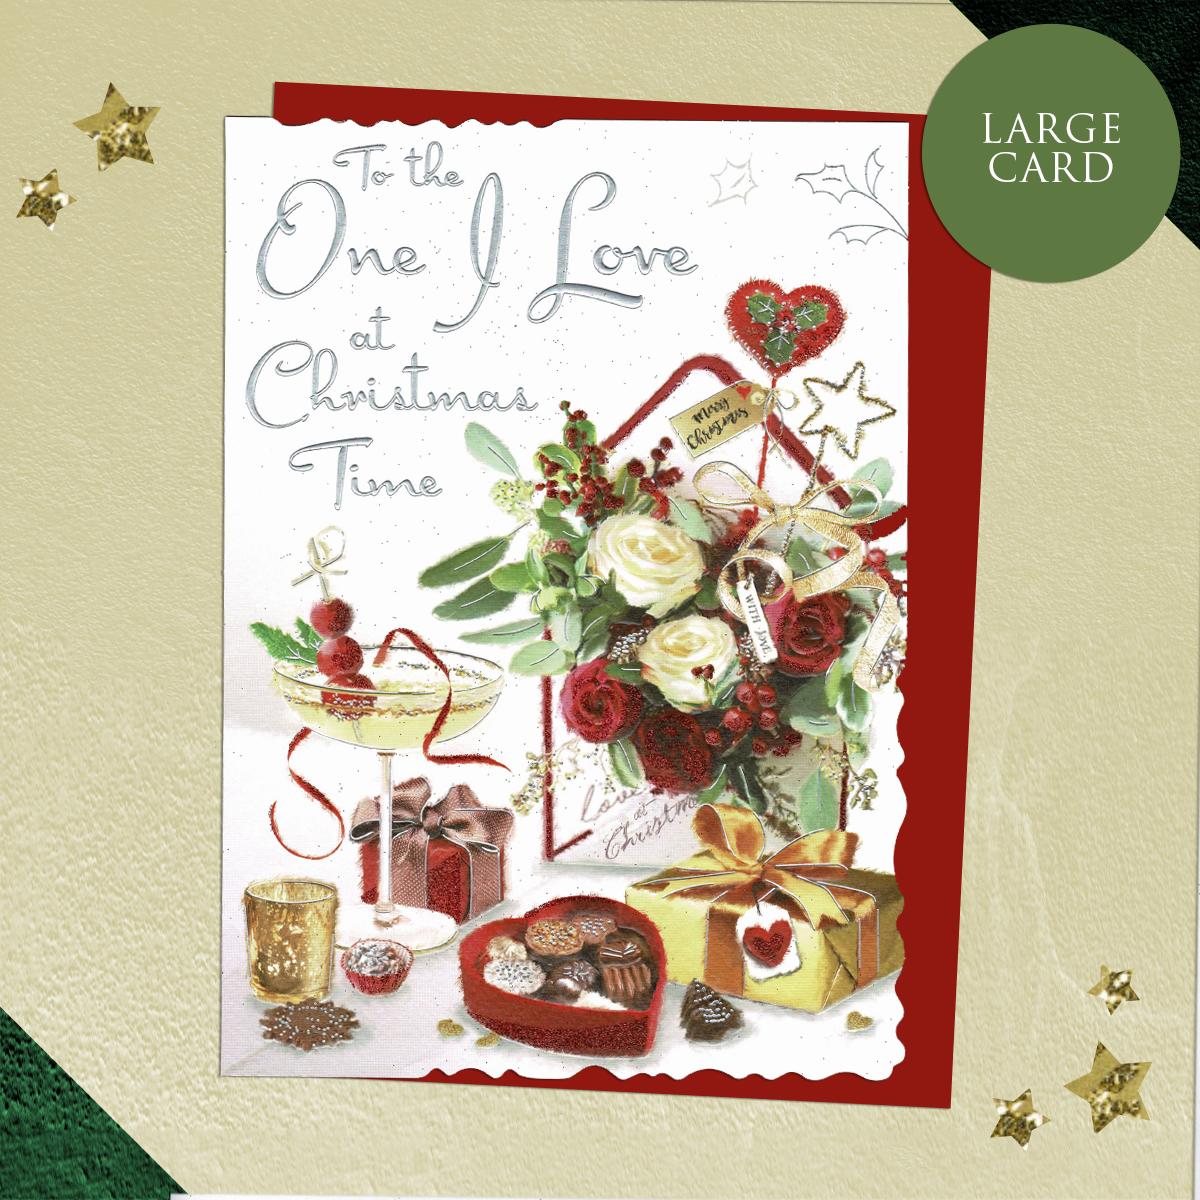 To The One I Love At Christmas Time Large Card Showing Flowers, Chocolates And Gifts. Enhanced With Red Glitter and Silver Lettering And Finished With A Red envelope